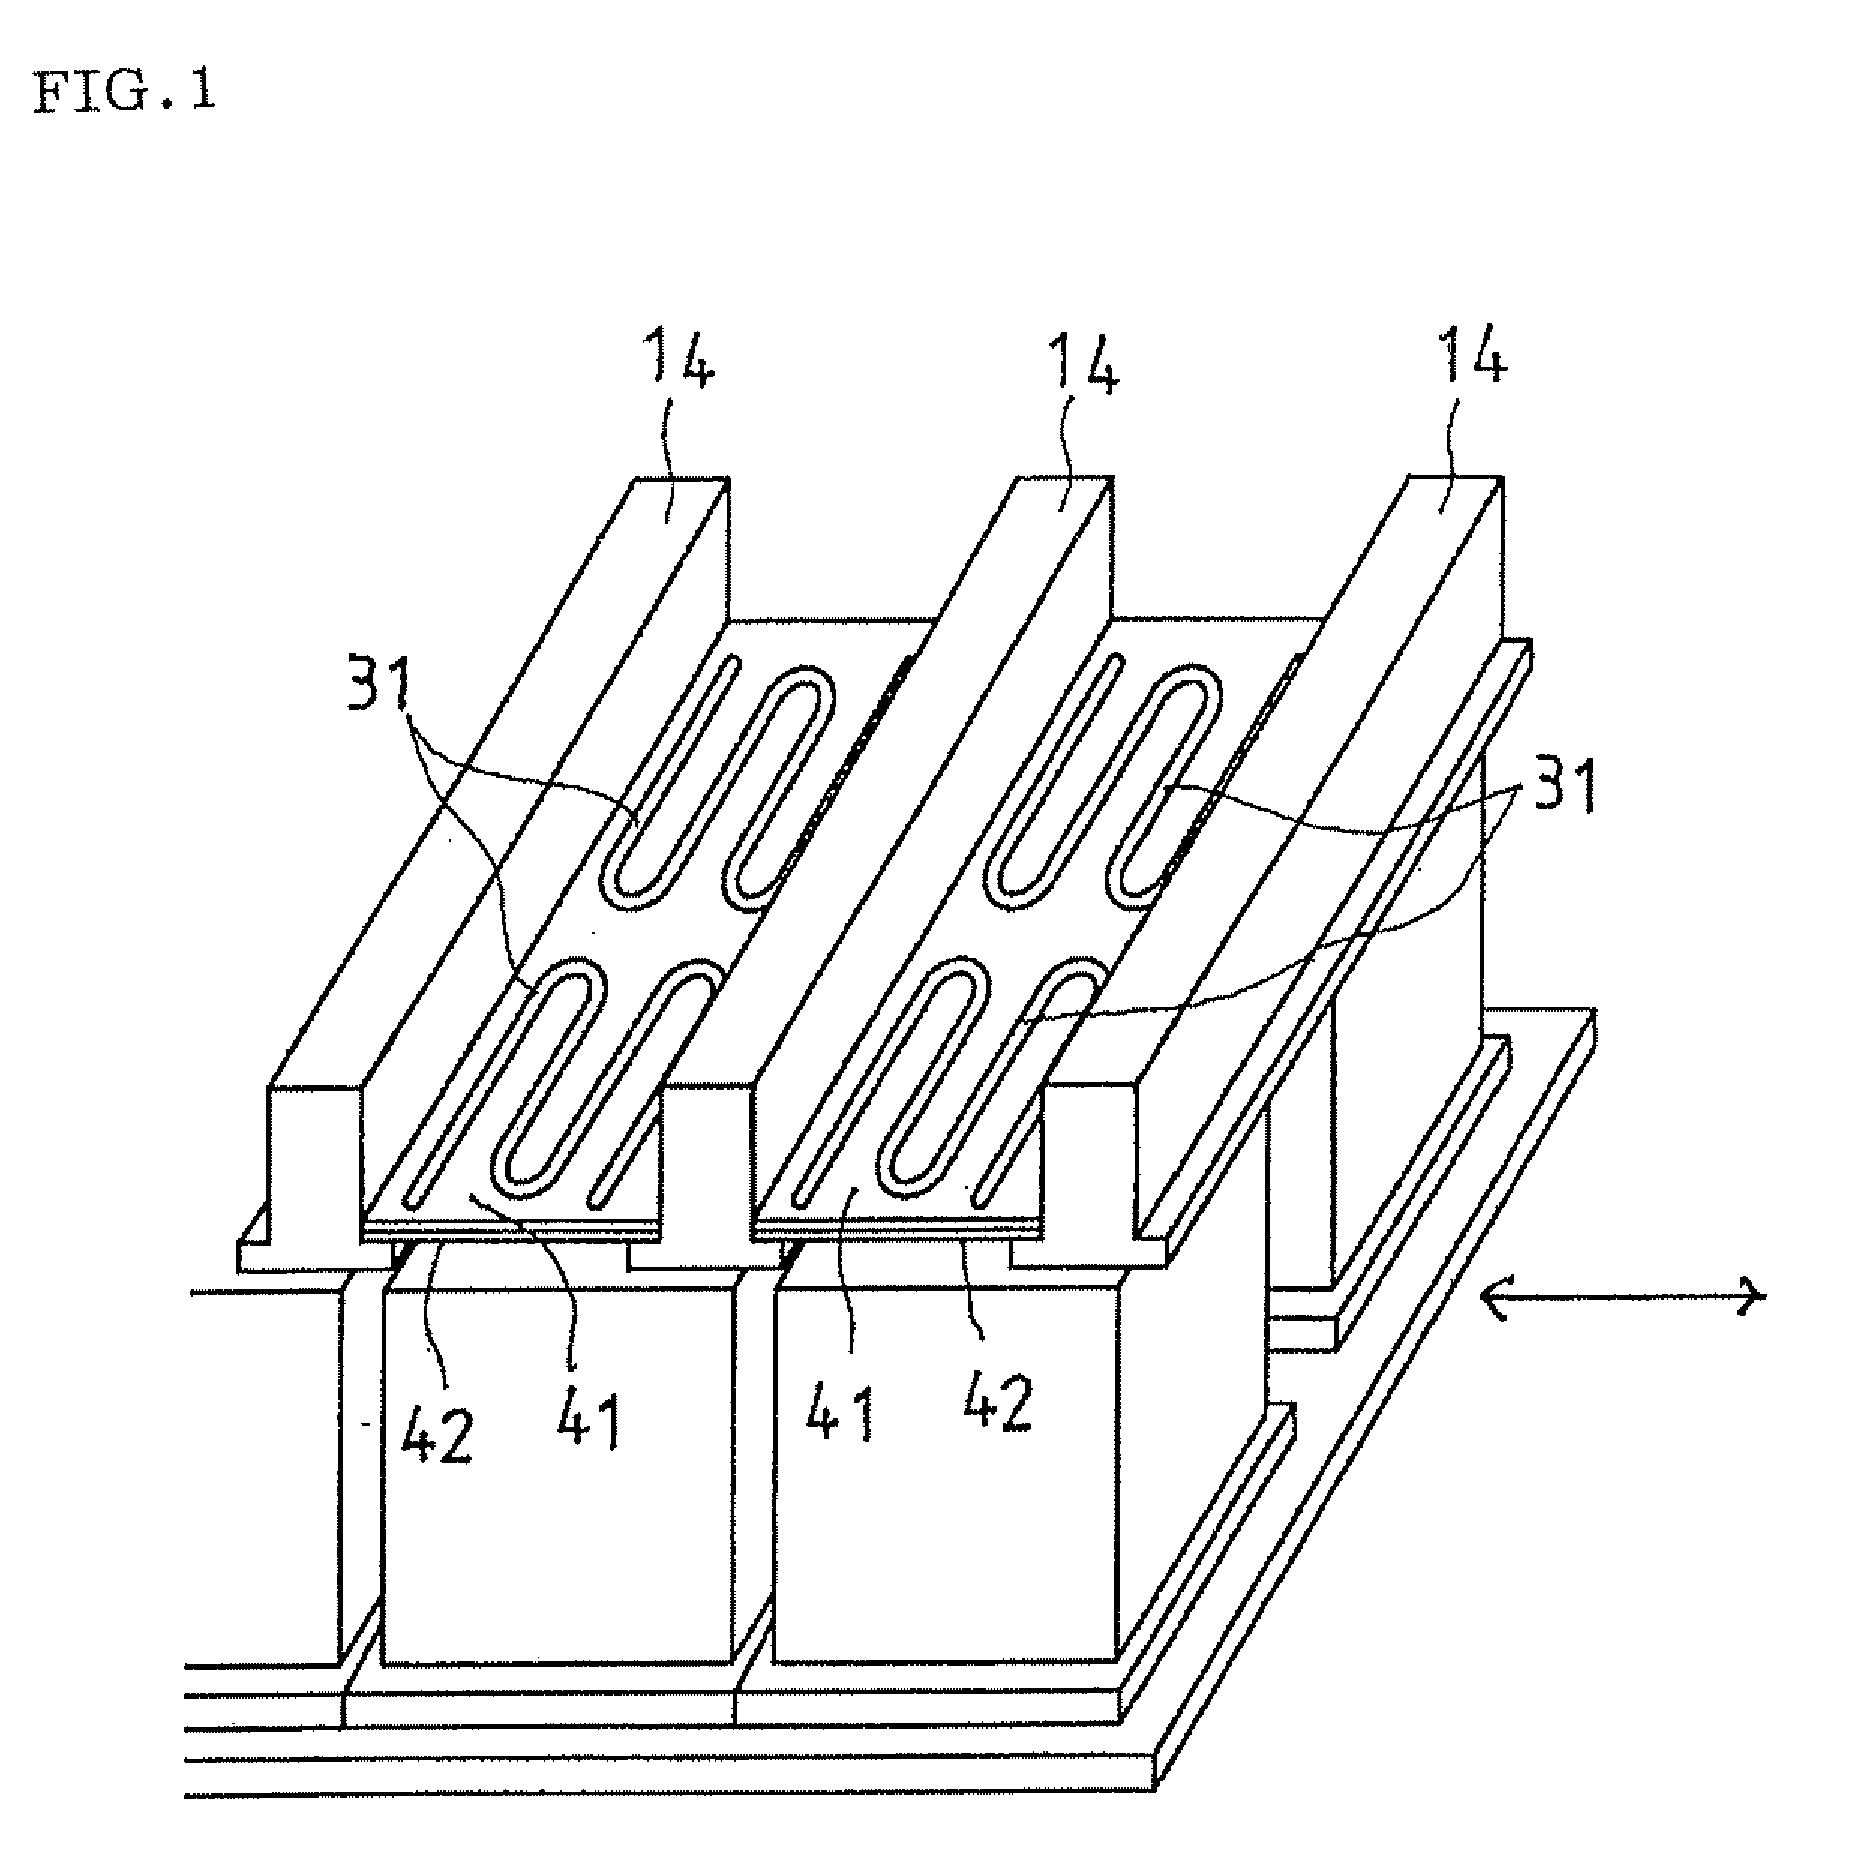 Support structure of heater